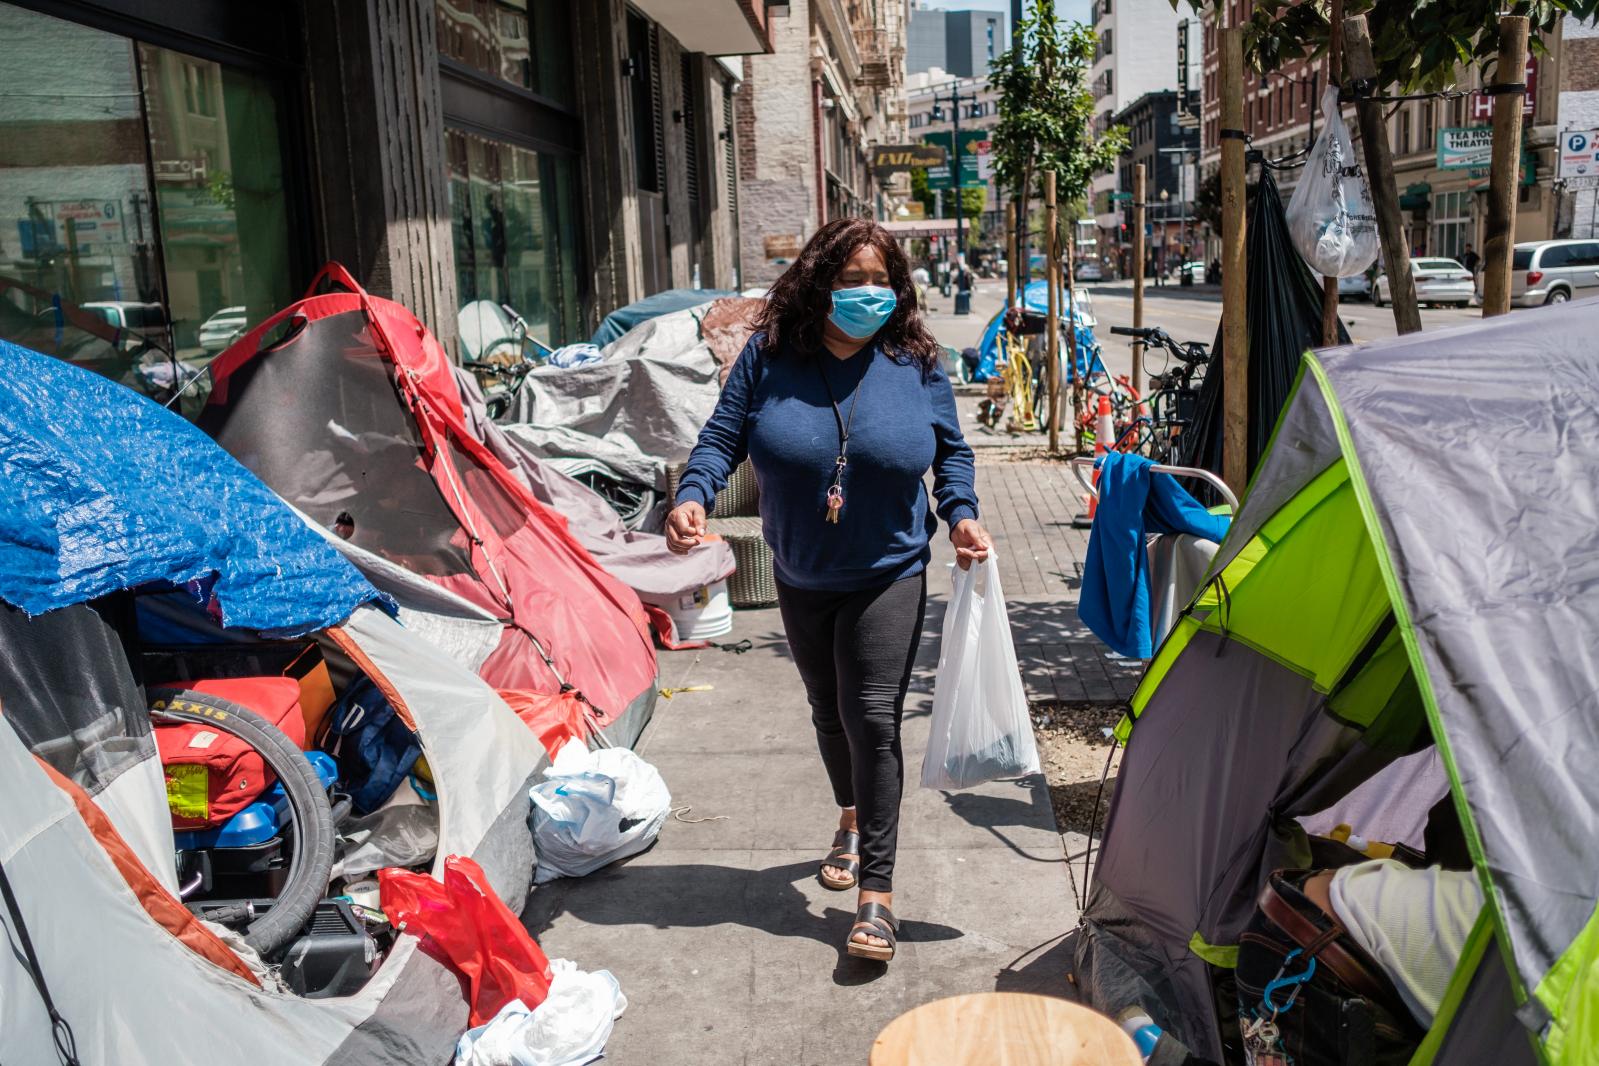 Image from San Francisco's Housing Crisis